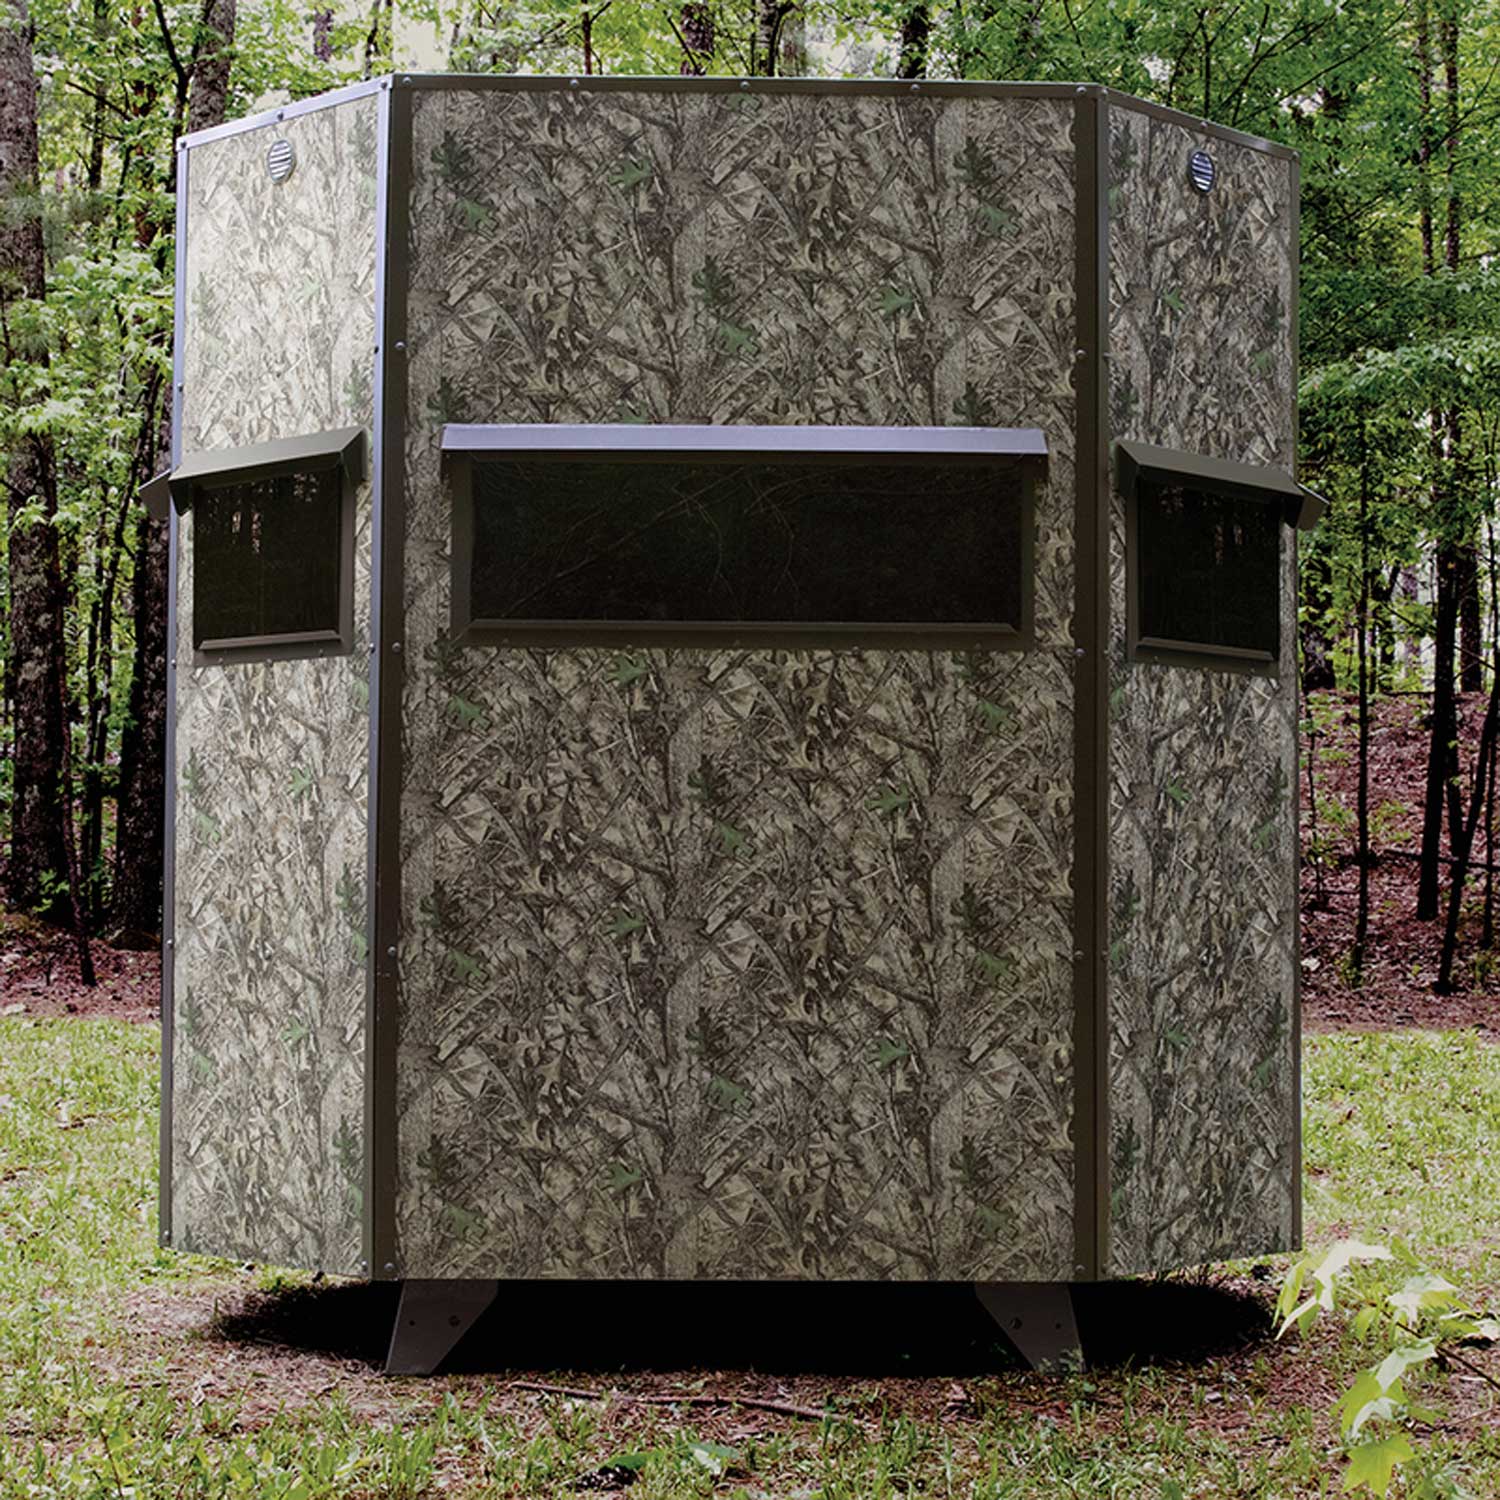 G7GR: Texas Hunter Wrangler Rifle Octagon Shaped Camo Aluminum 5' x 7' Deer Blind with 7 in. Legs and Full Door, Stairs and Handrails